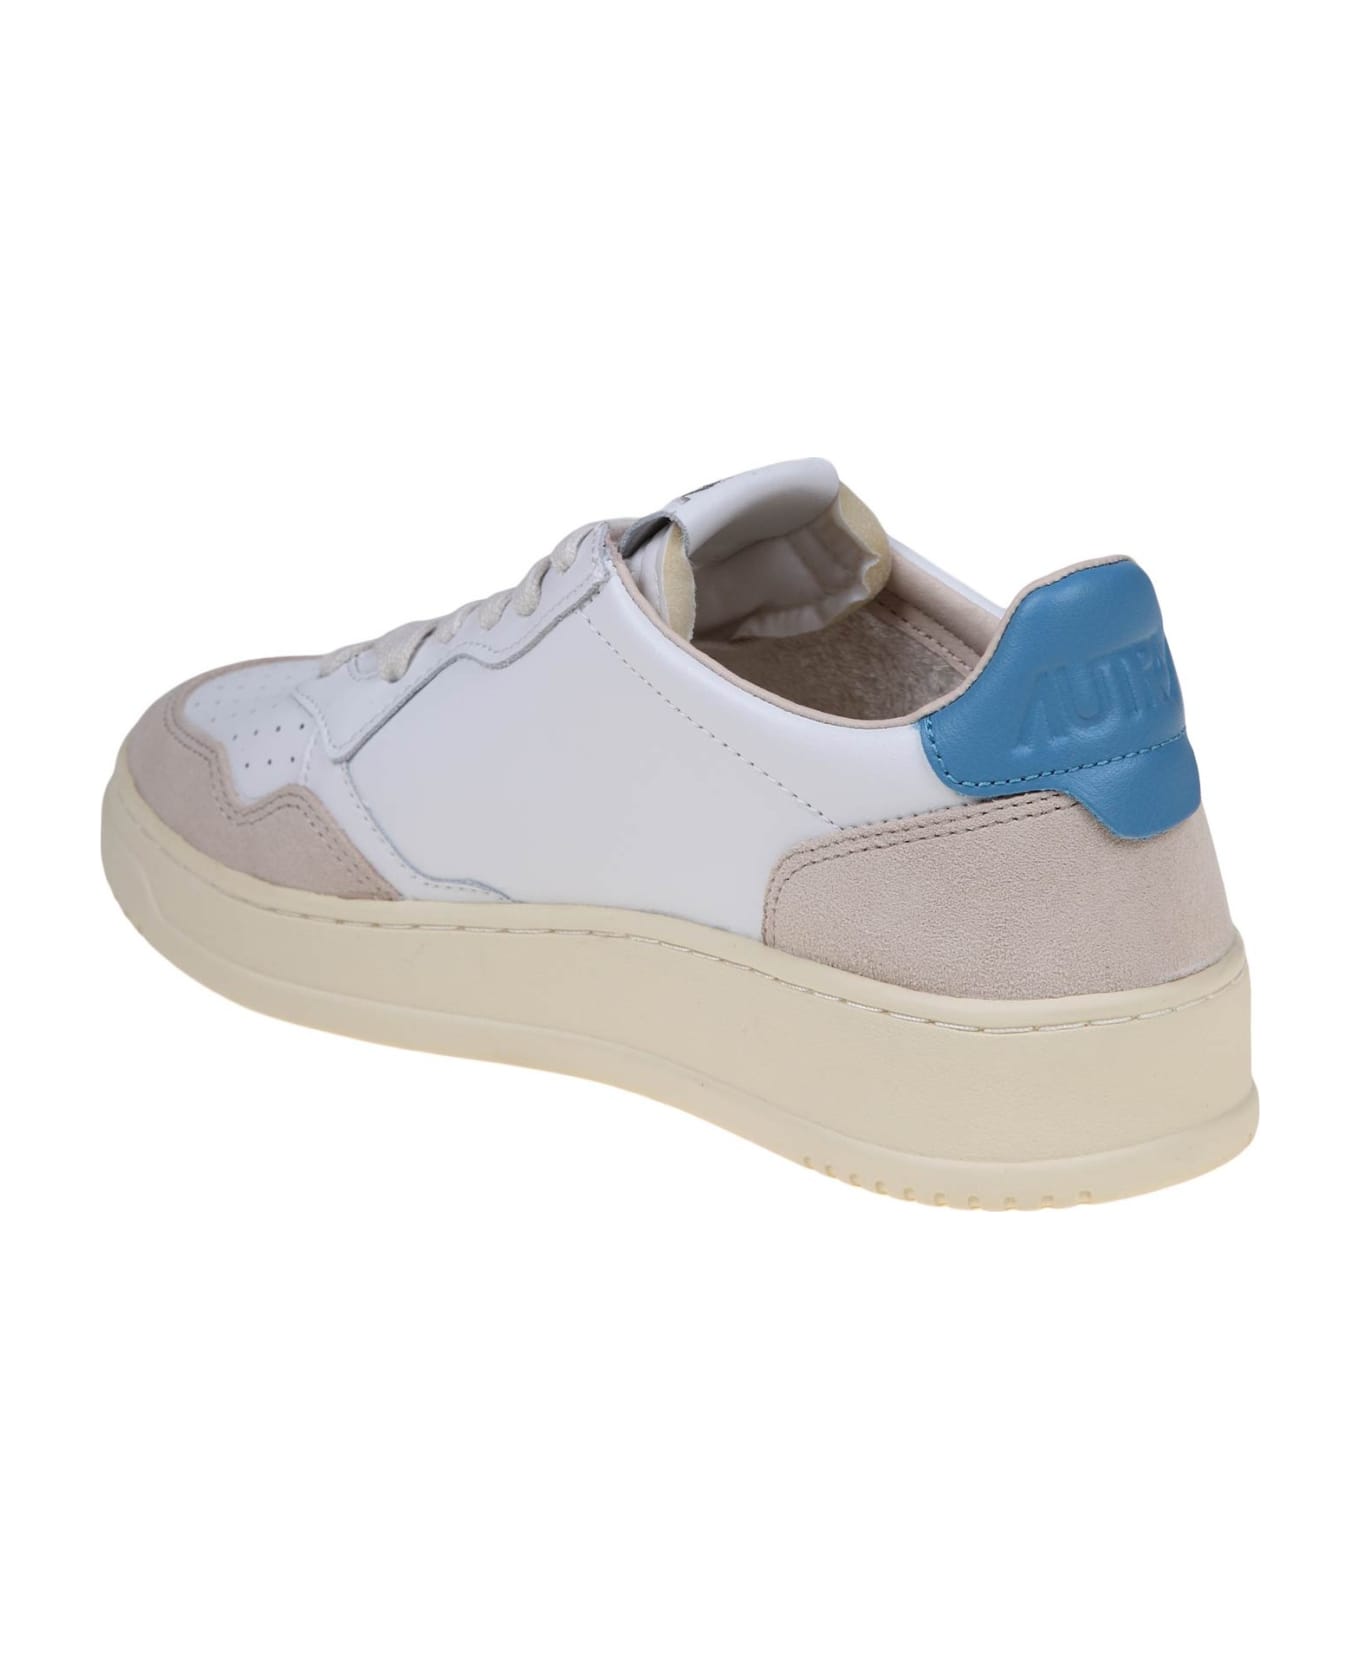 Autry Medalist Low Sneakers - white/blue スニーカー